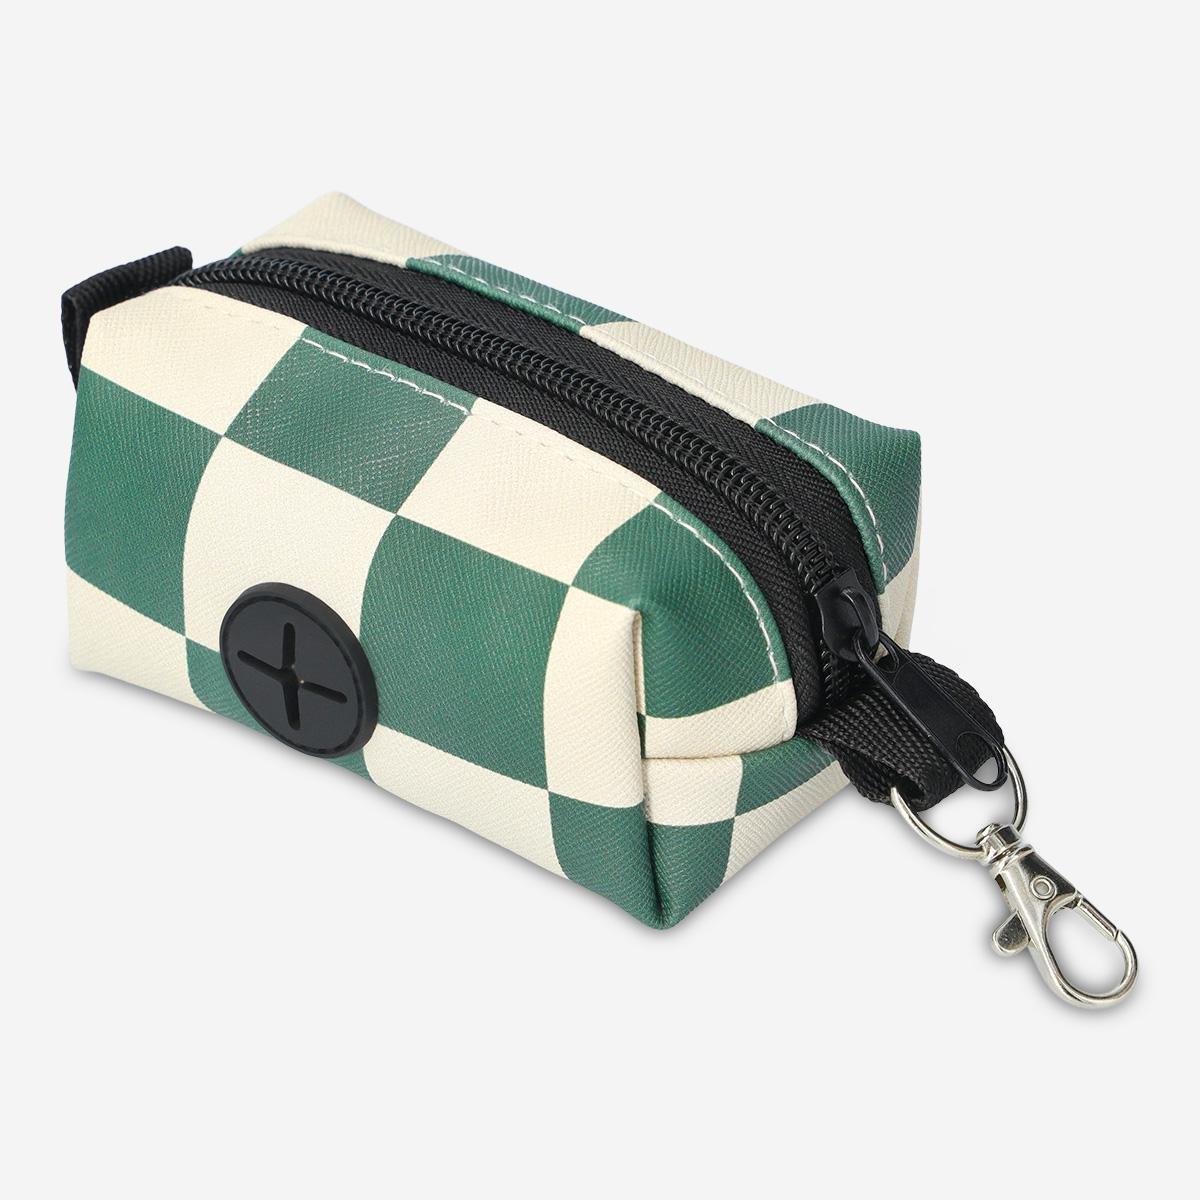 Multicolour pouch. for dog waste bags